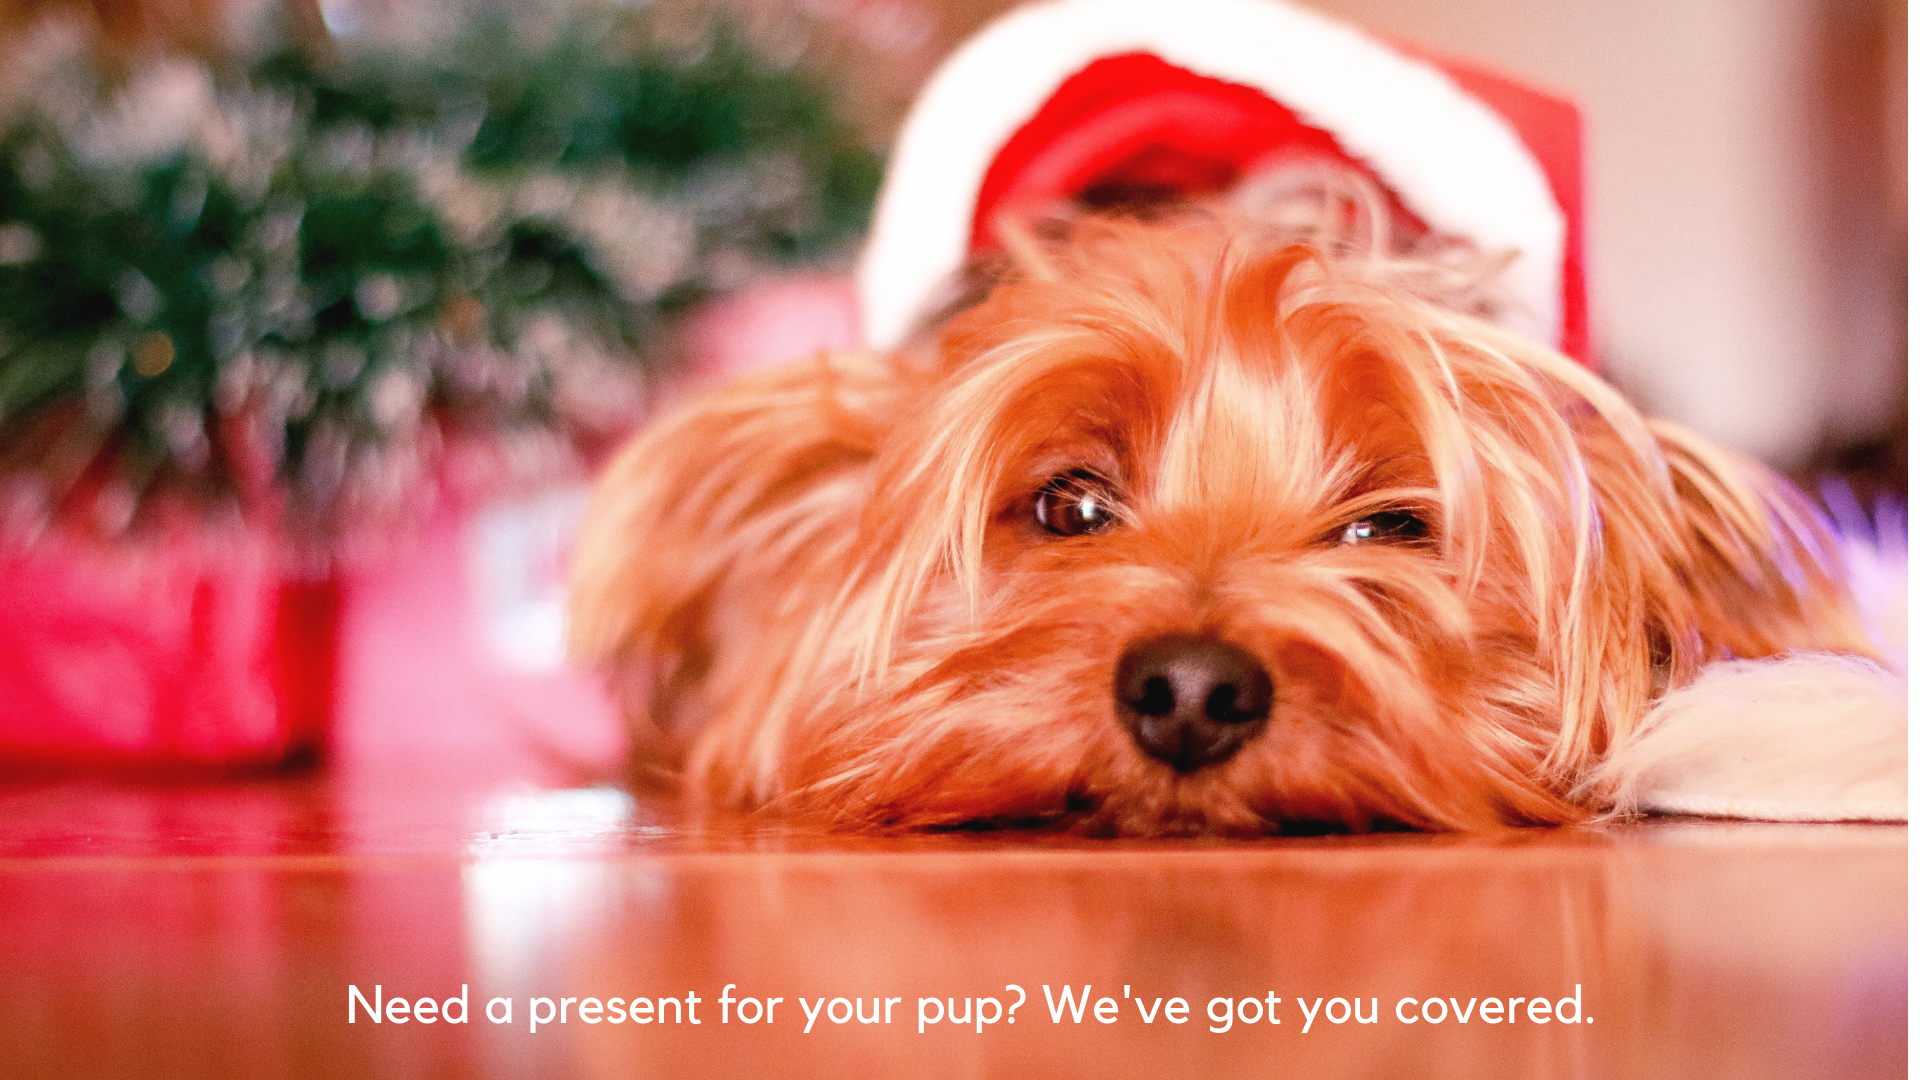 Need a present for your pup? We've got you covered.